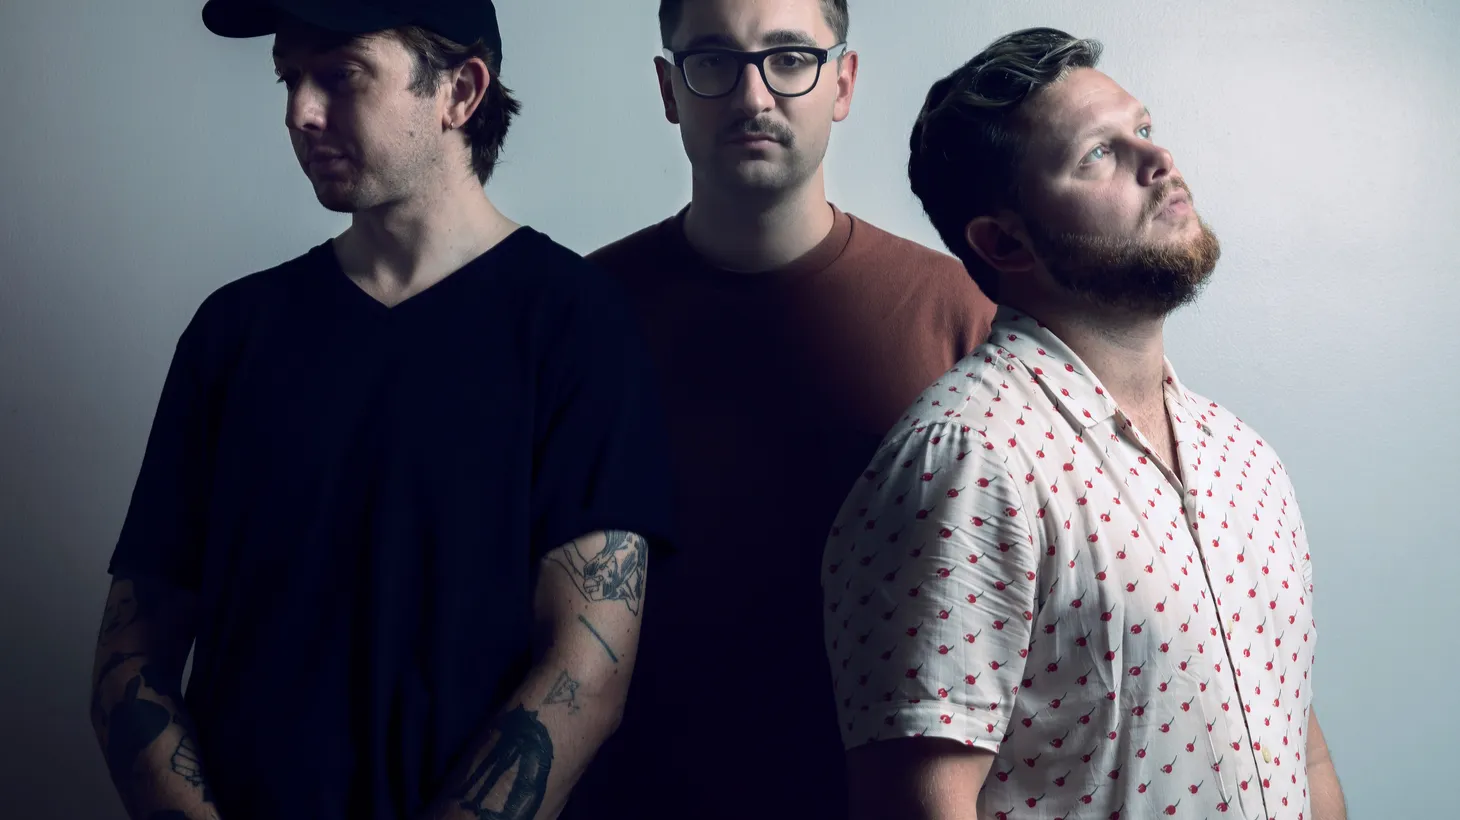 After winning a Mercury Prize, earning a Grammy nomination and selling over a million albums, UK trio alt-J needed a break.